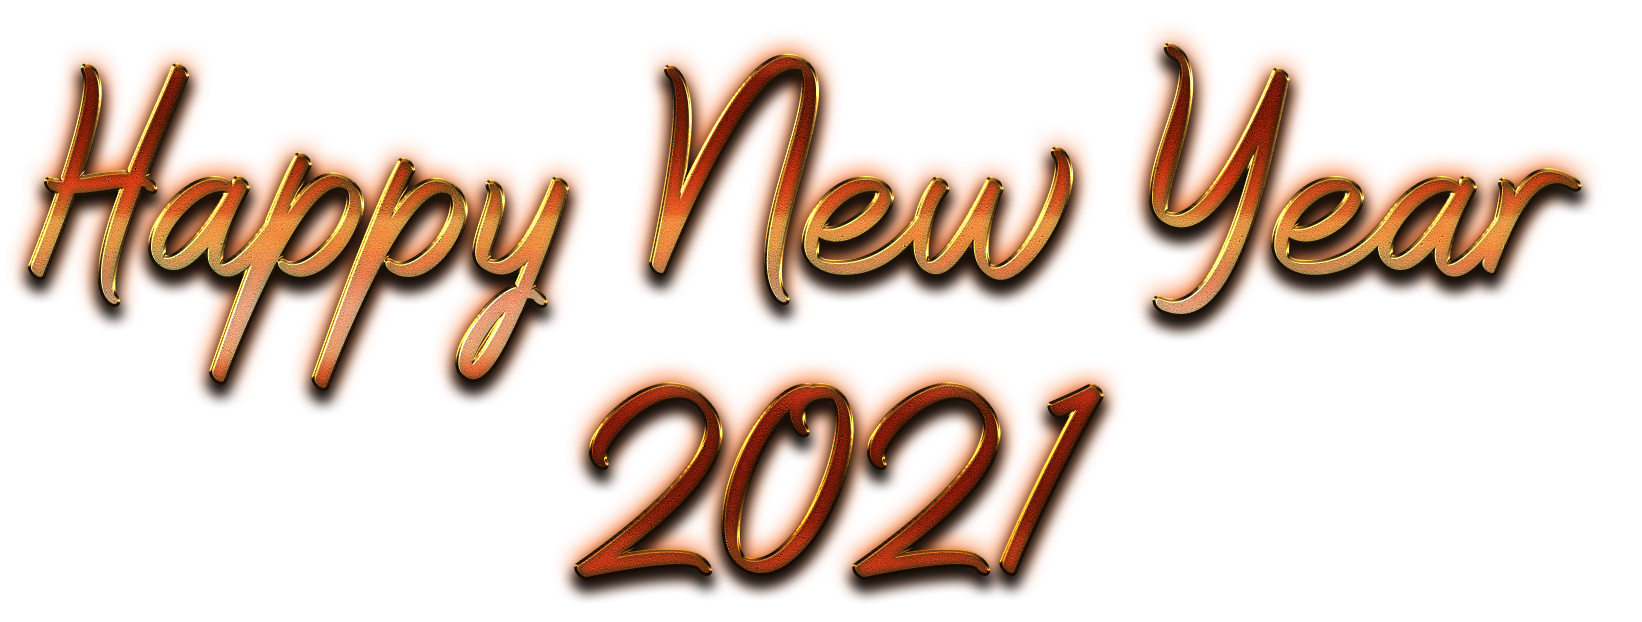 2021 New Year PNG, Happy New Year 2021 Images - Free Transparent PNG Logos